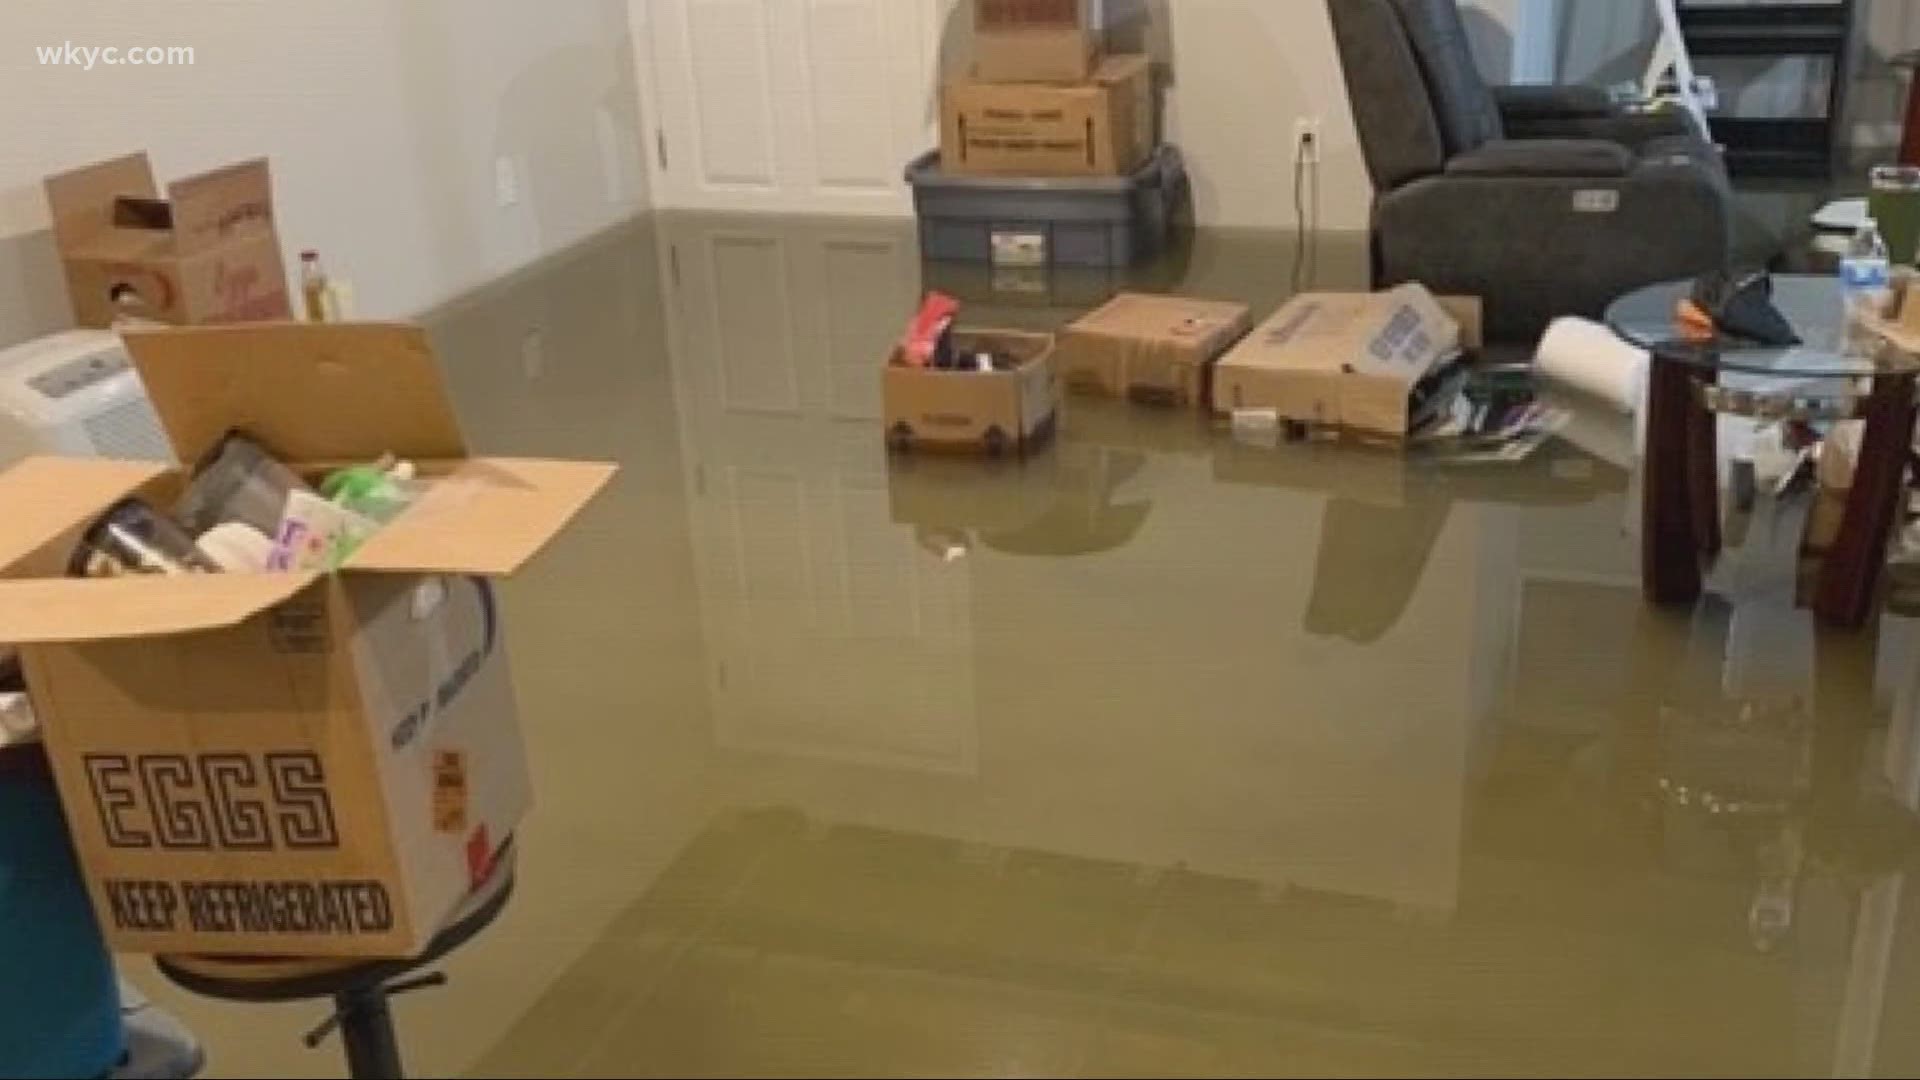 Your home has just flooded, what do you do next? Danielle Serino spoke with an expert on what to do to salvage your home.